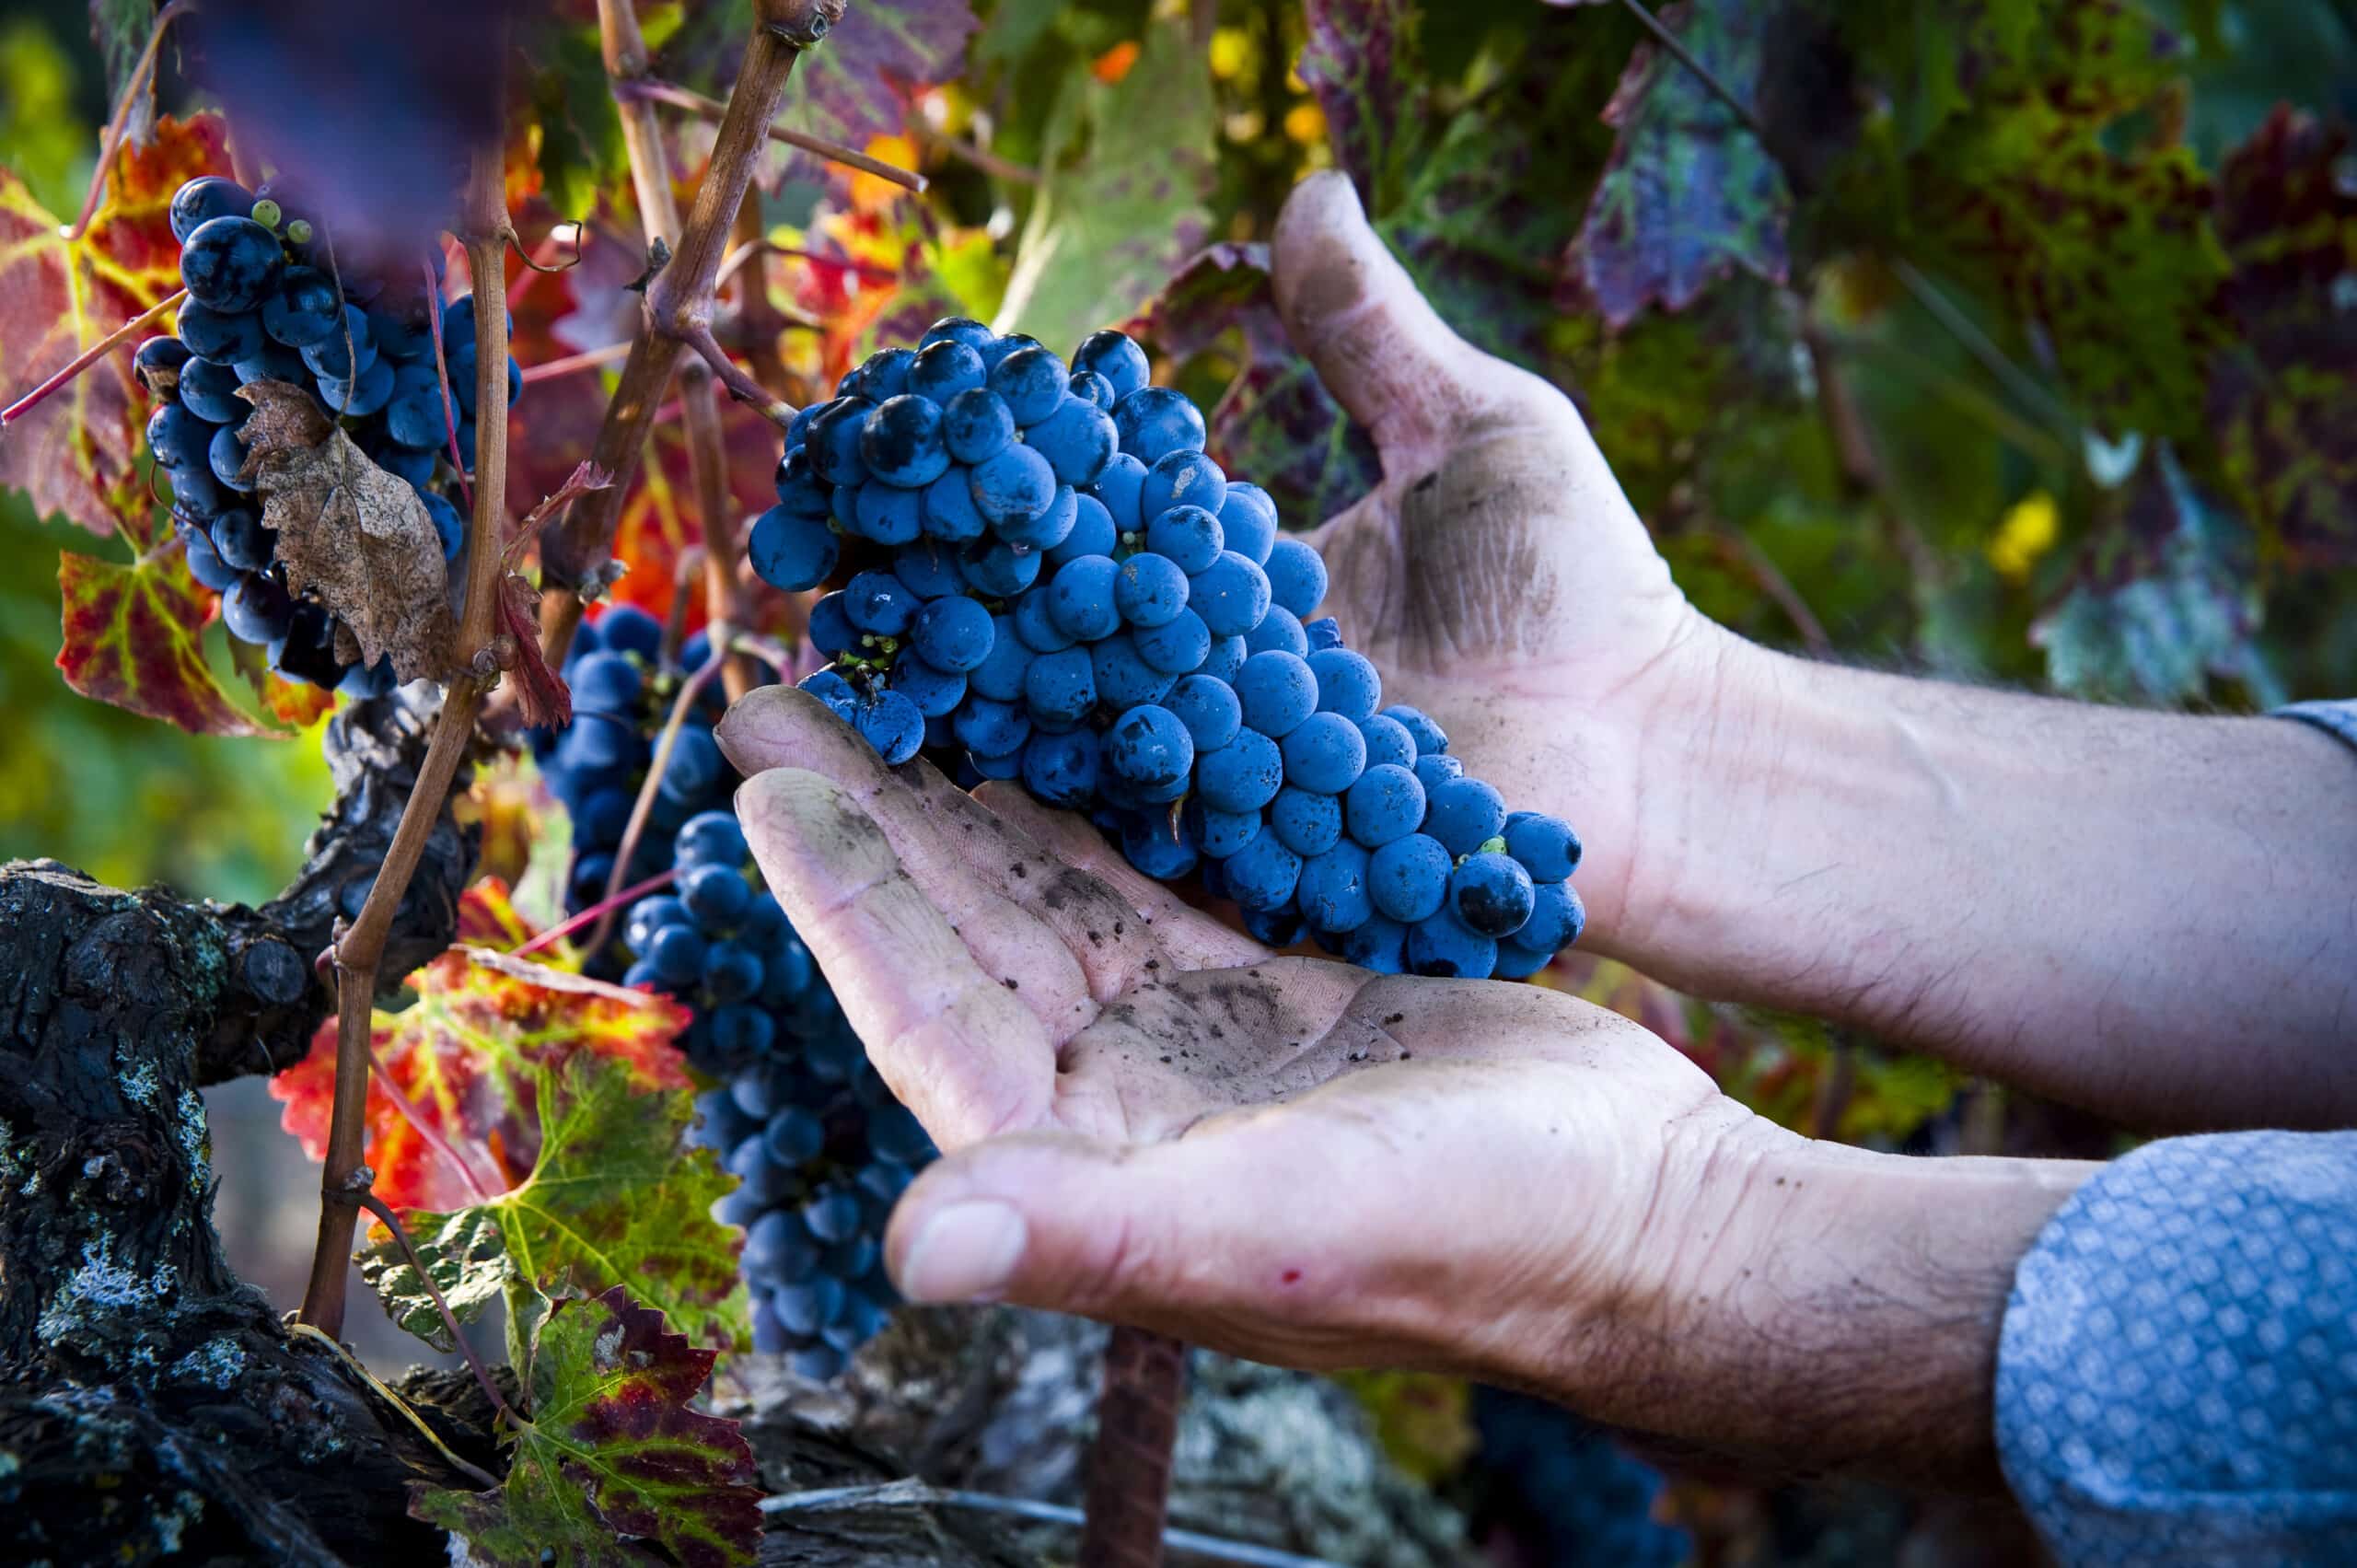 Hands of a migrant worker holding cabernet sauvignon wine grapes in vineyard with copy-space.